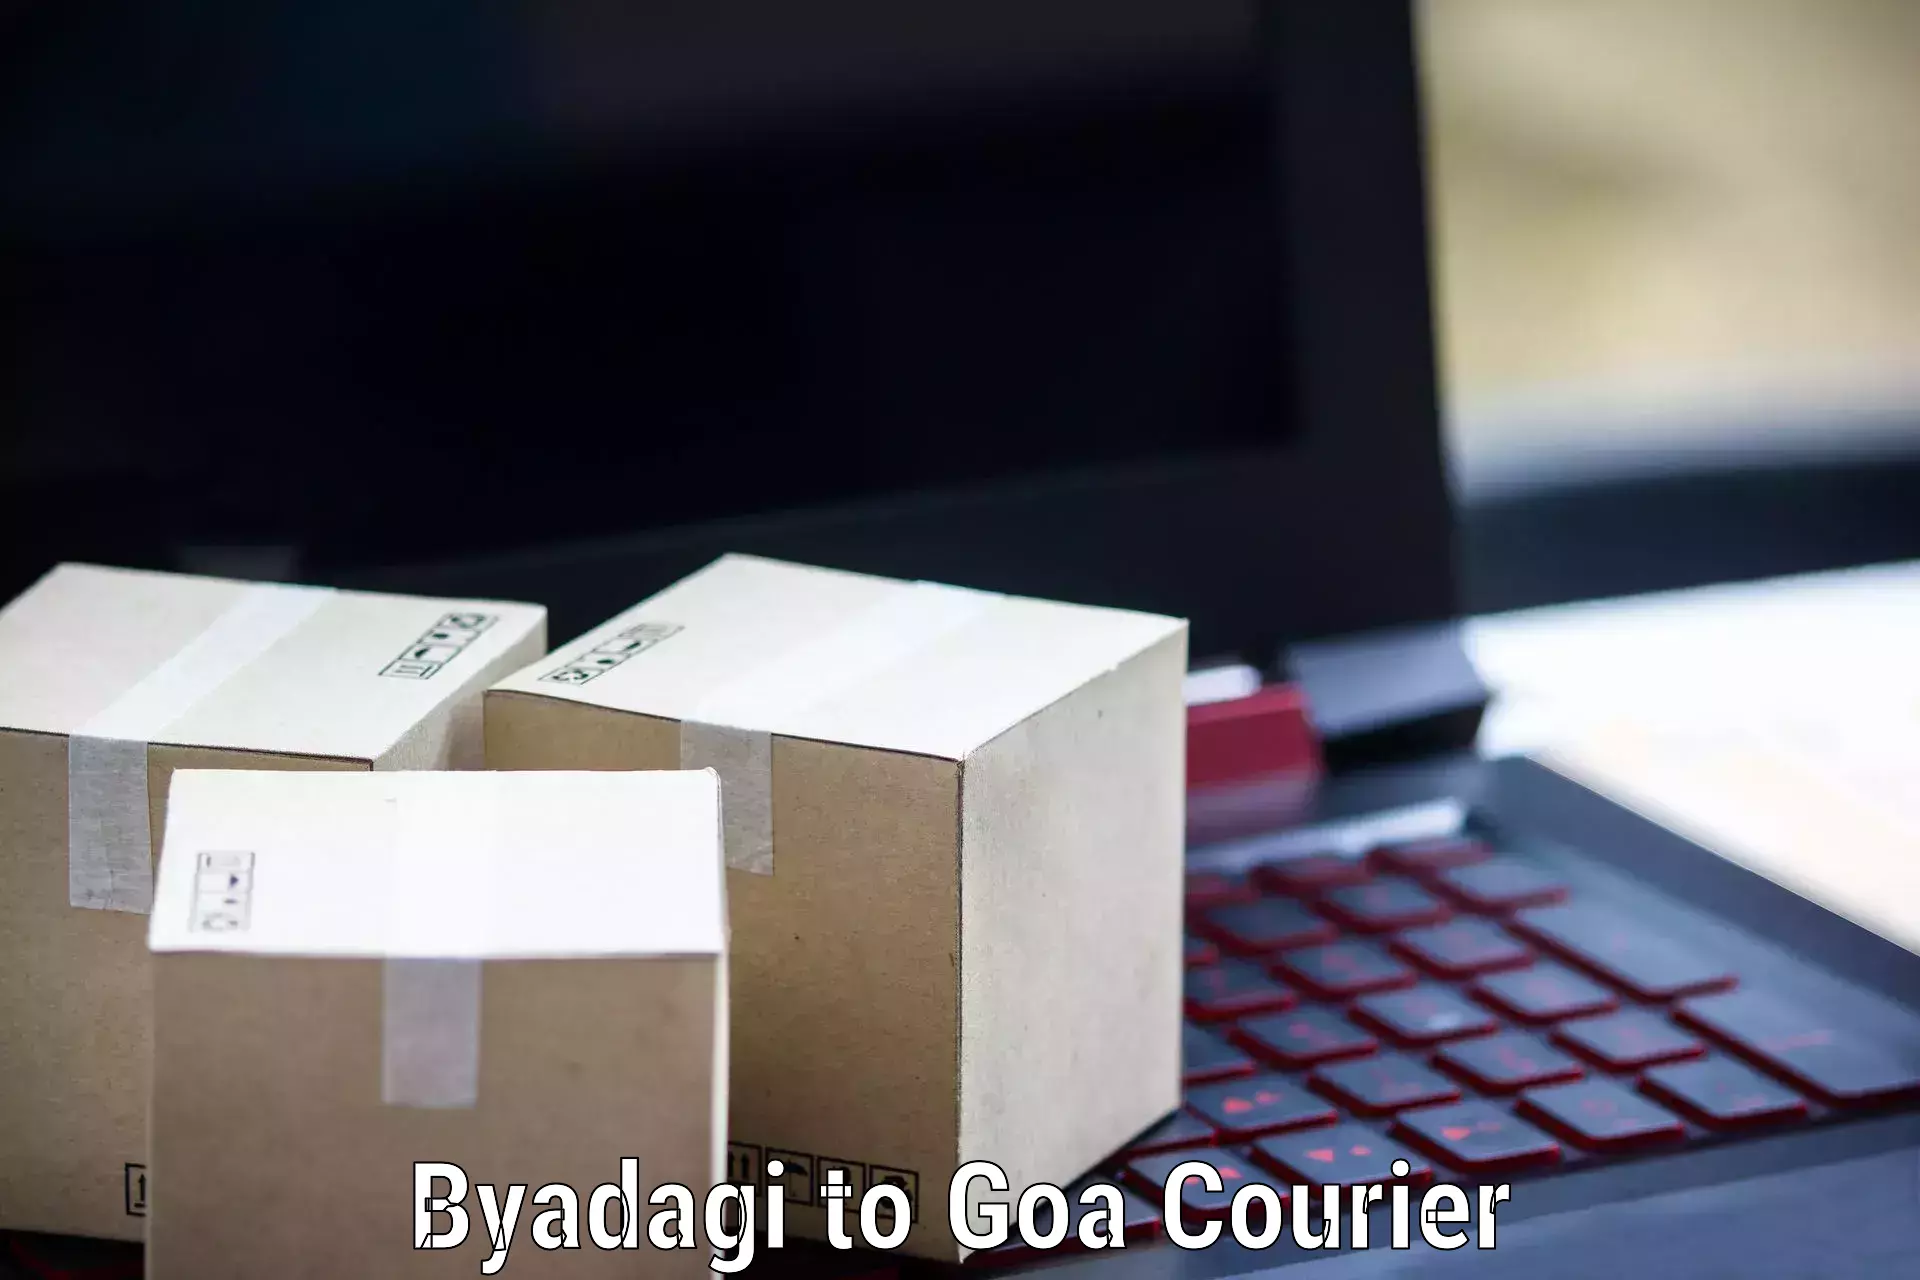 Global courier networks Byadagi to Goa